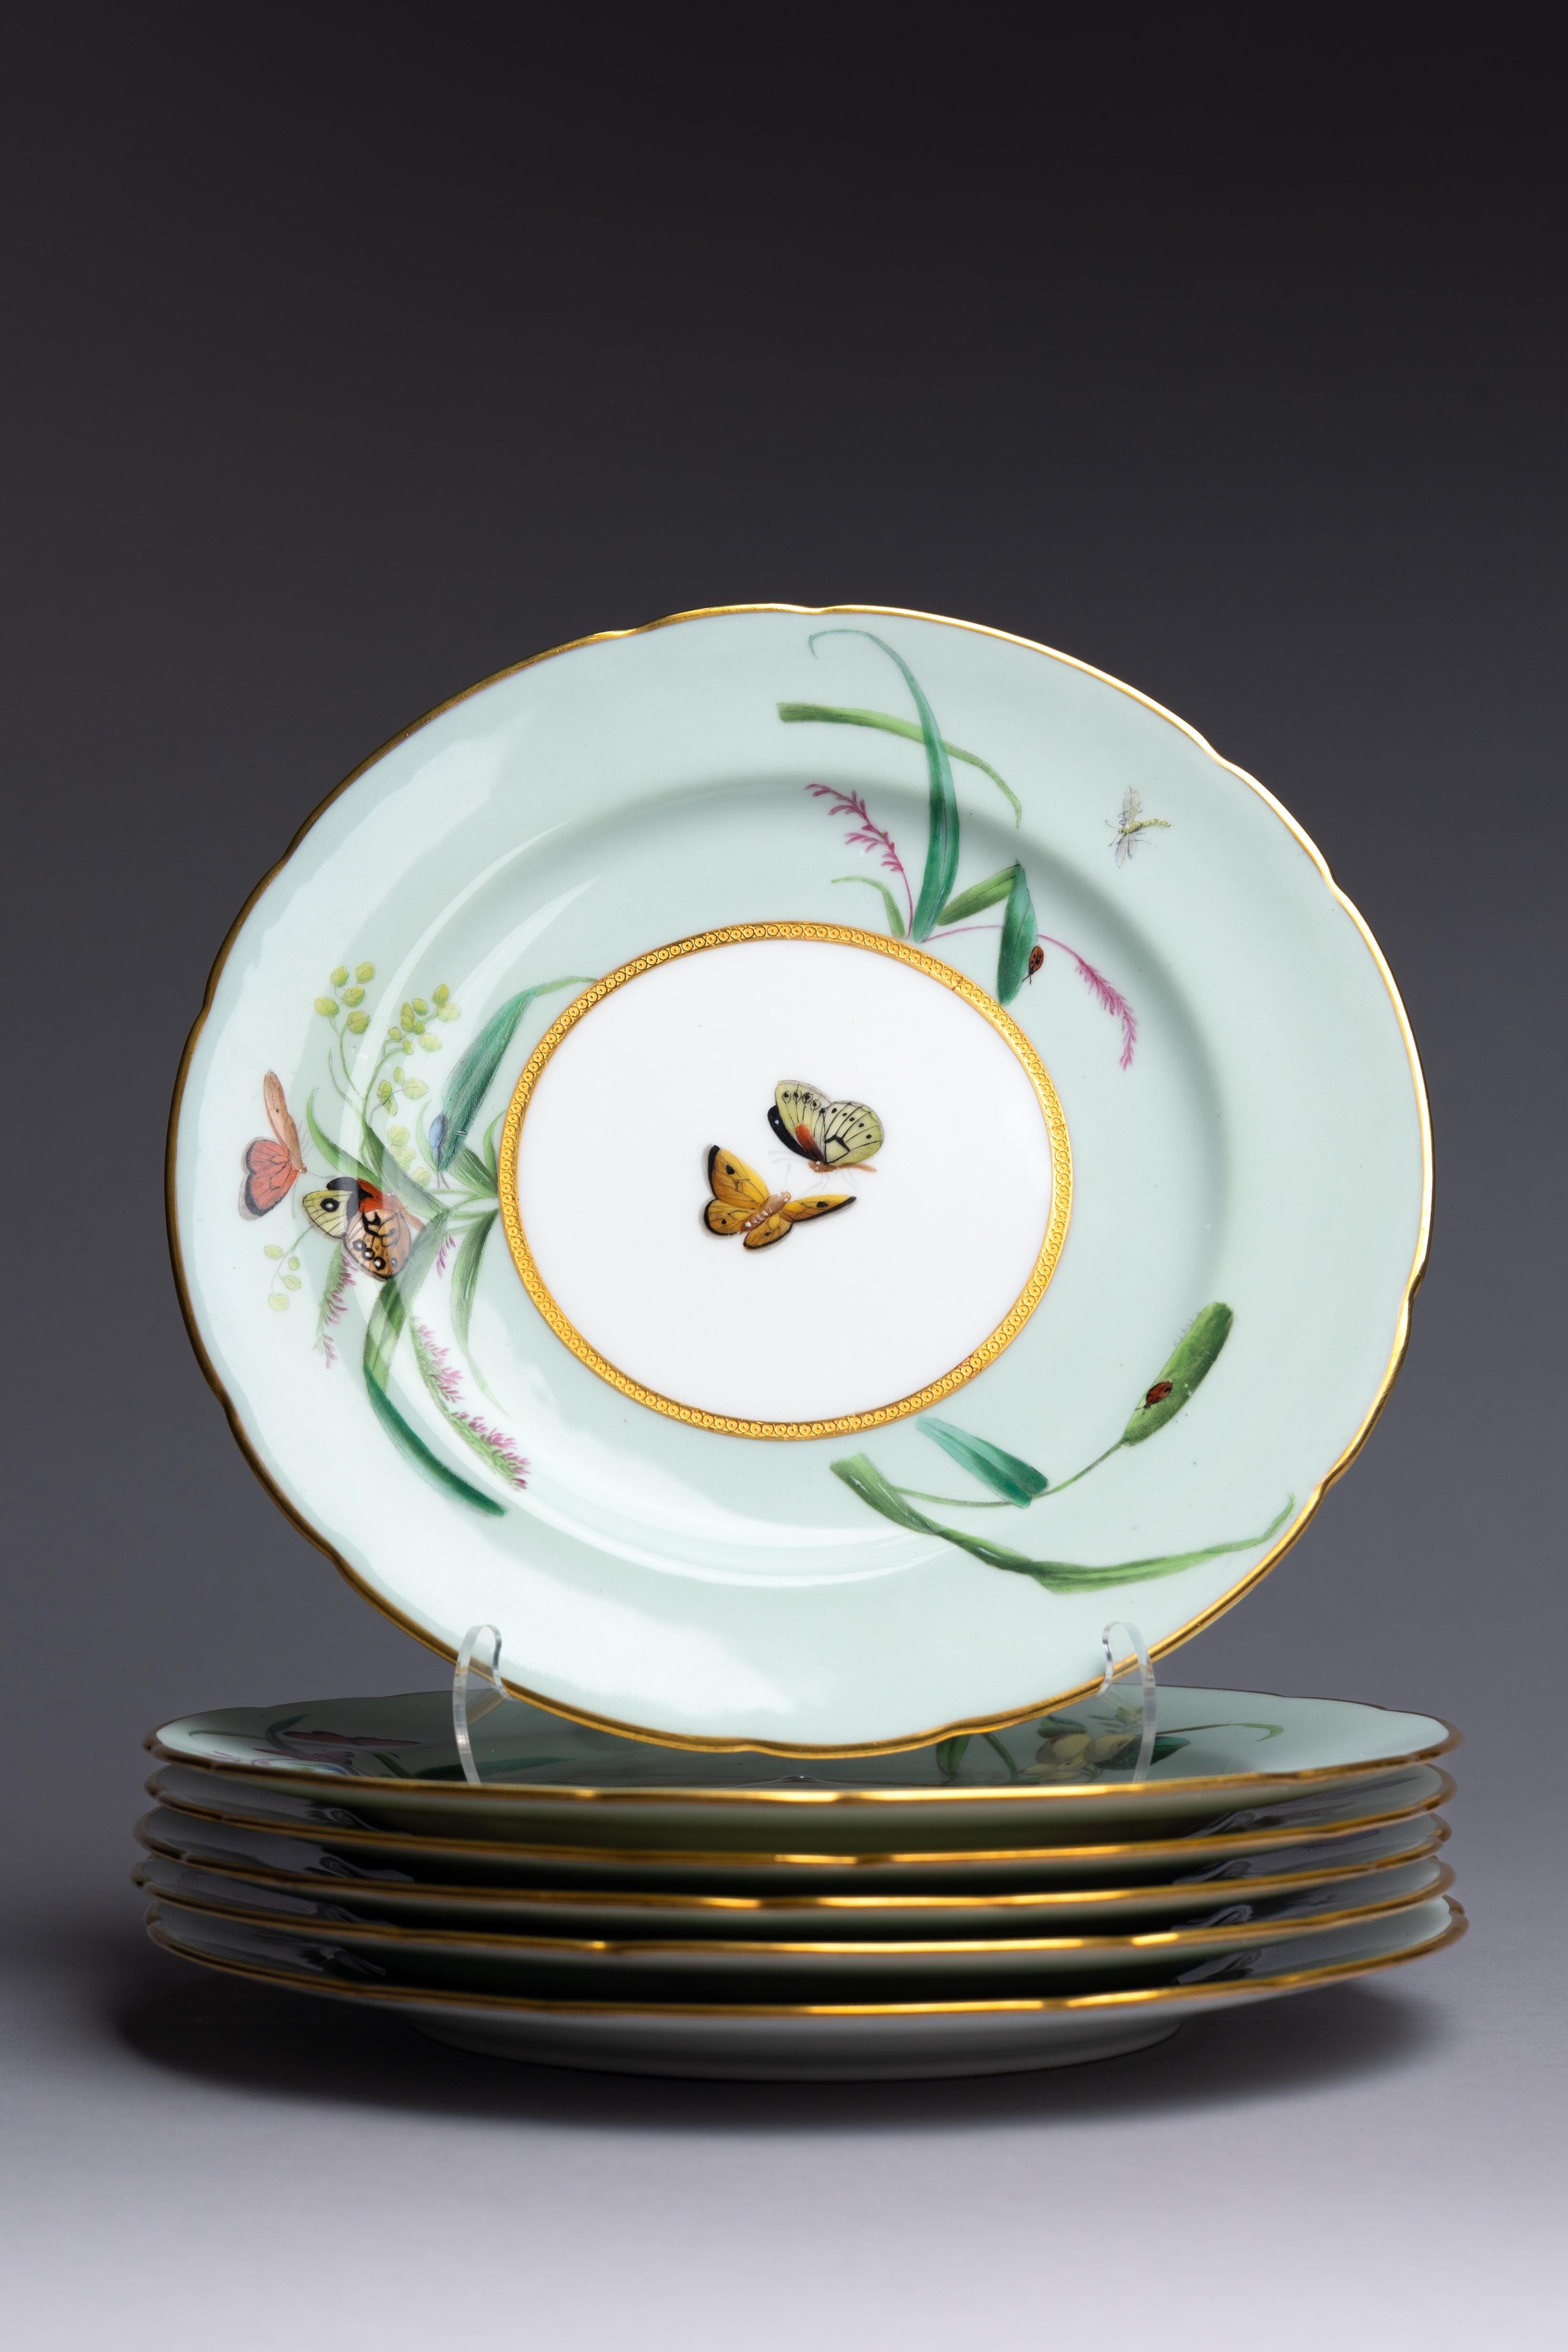 A set of 12 dinner plates and 3 cake stands by Minton from 1874 featuring mint green borders and beautifully hand-painted butterflies.

The 1874 production of these Minton dinner plates corresponds with the beginnings of the factory’s Aesthetic